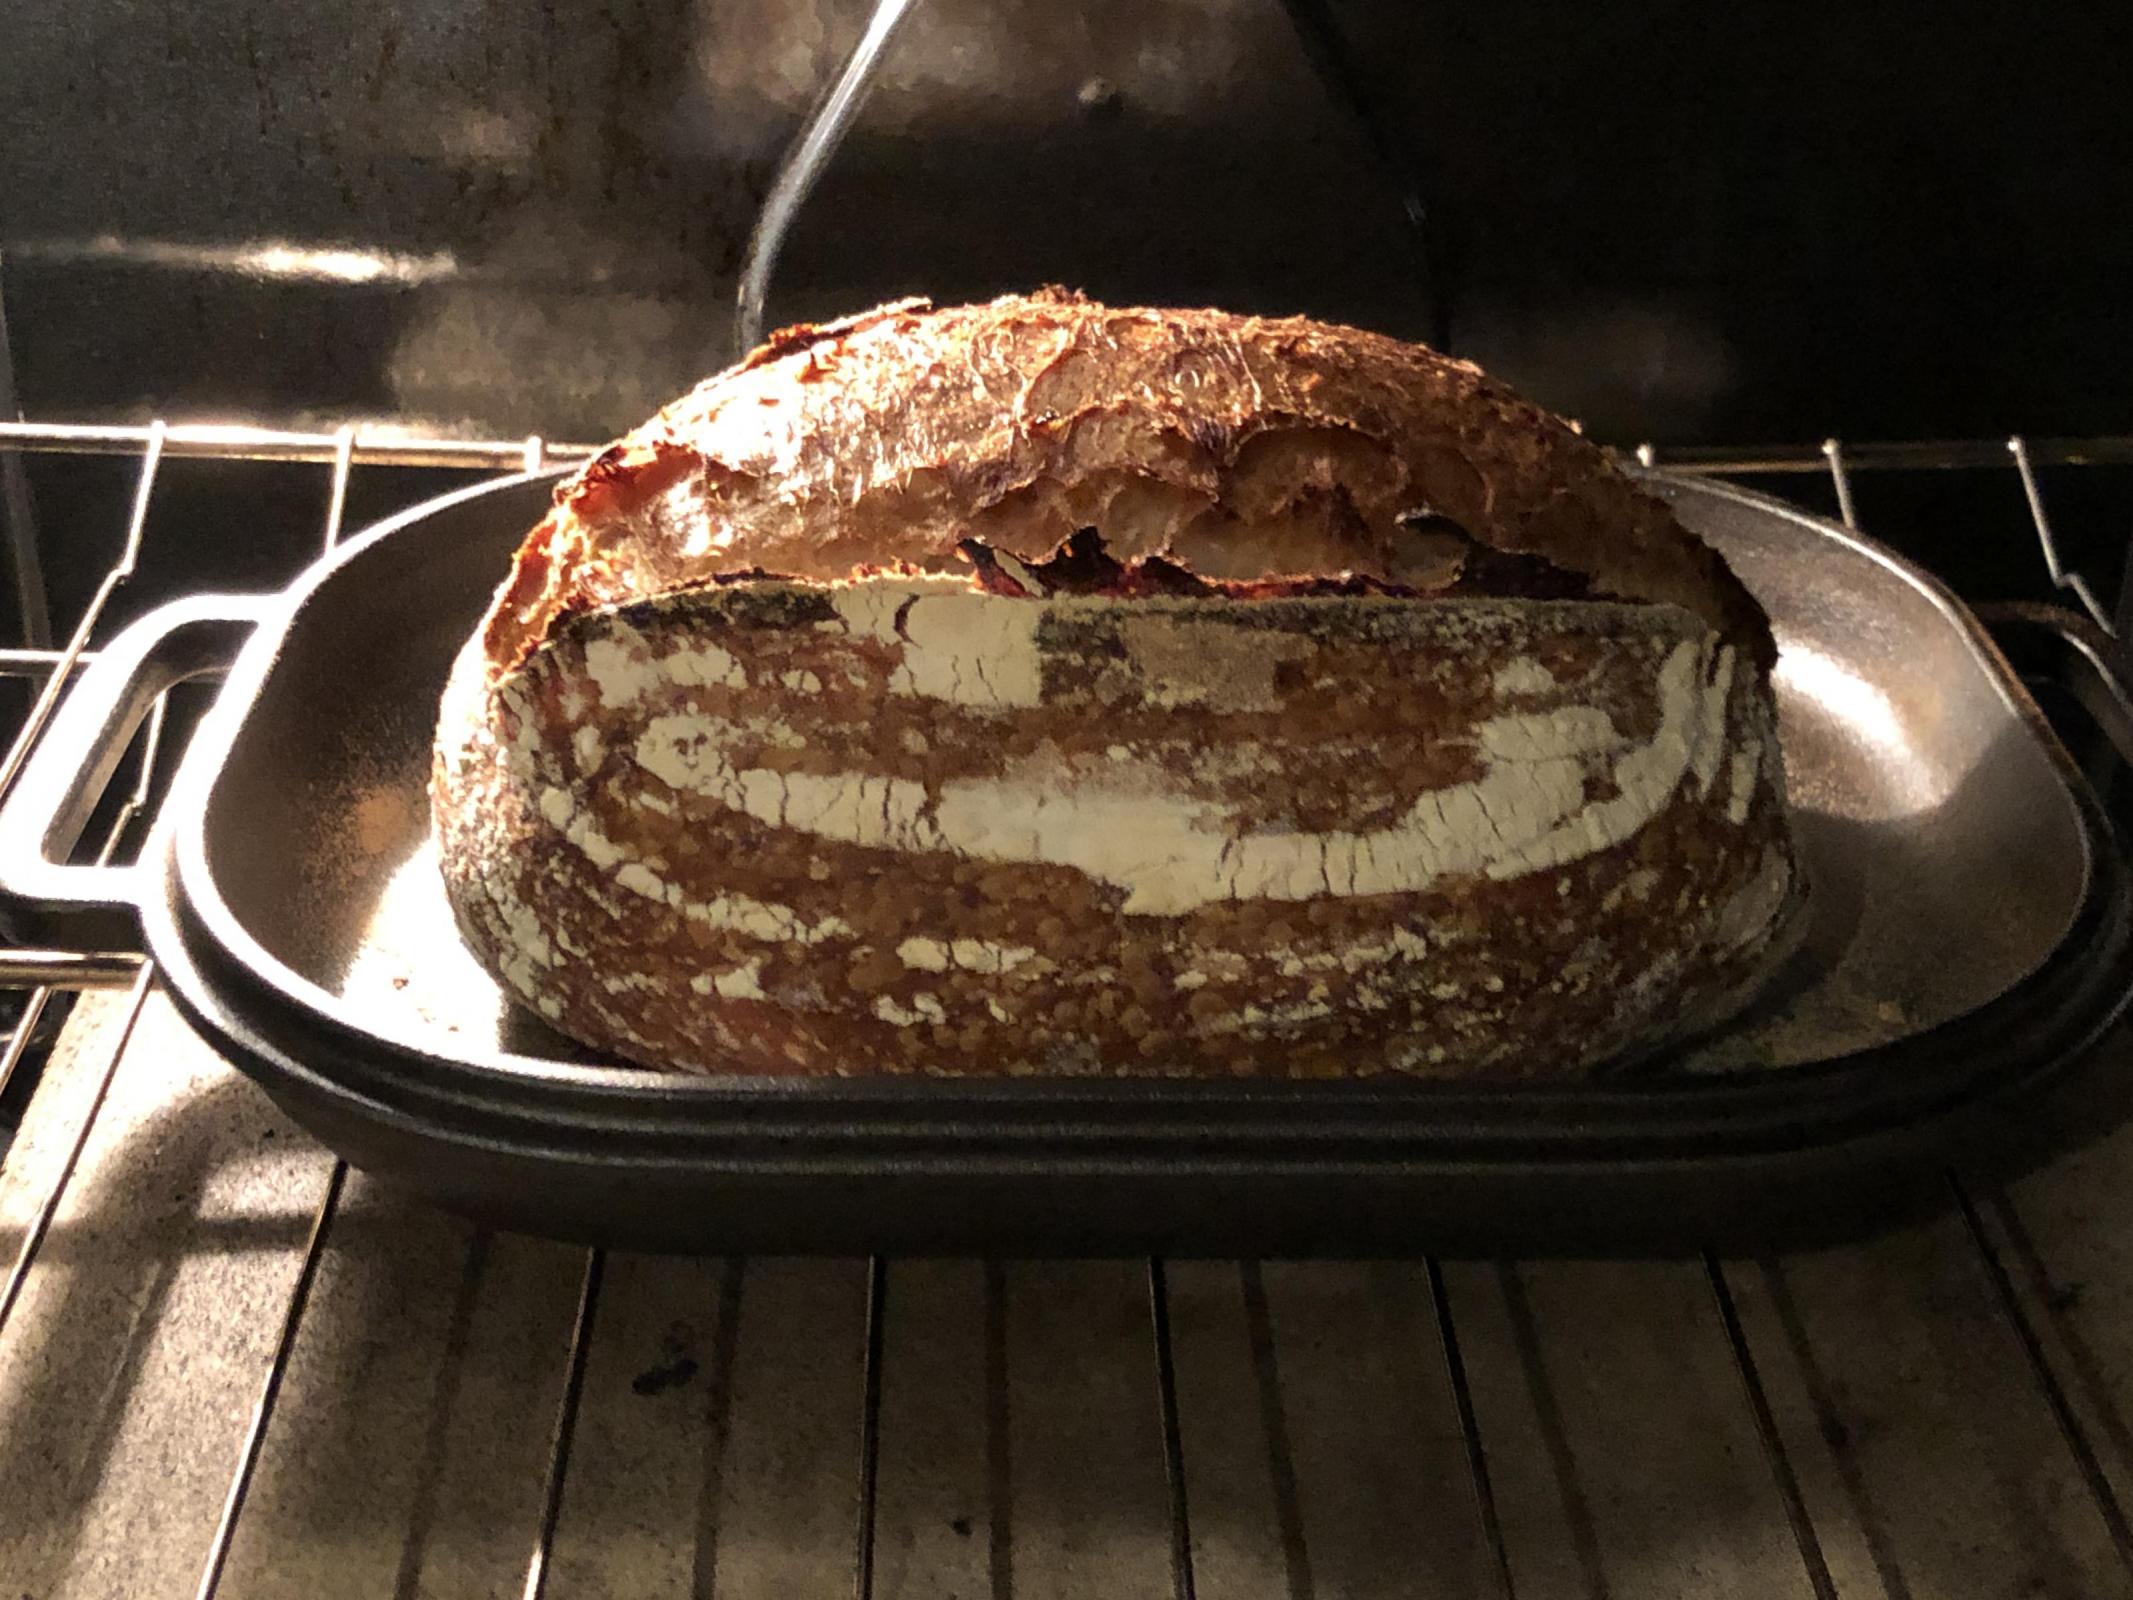 Challenger Breadware - “The crust is okay with bread from the pot